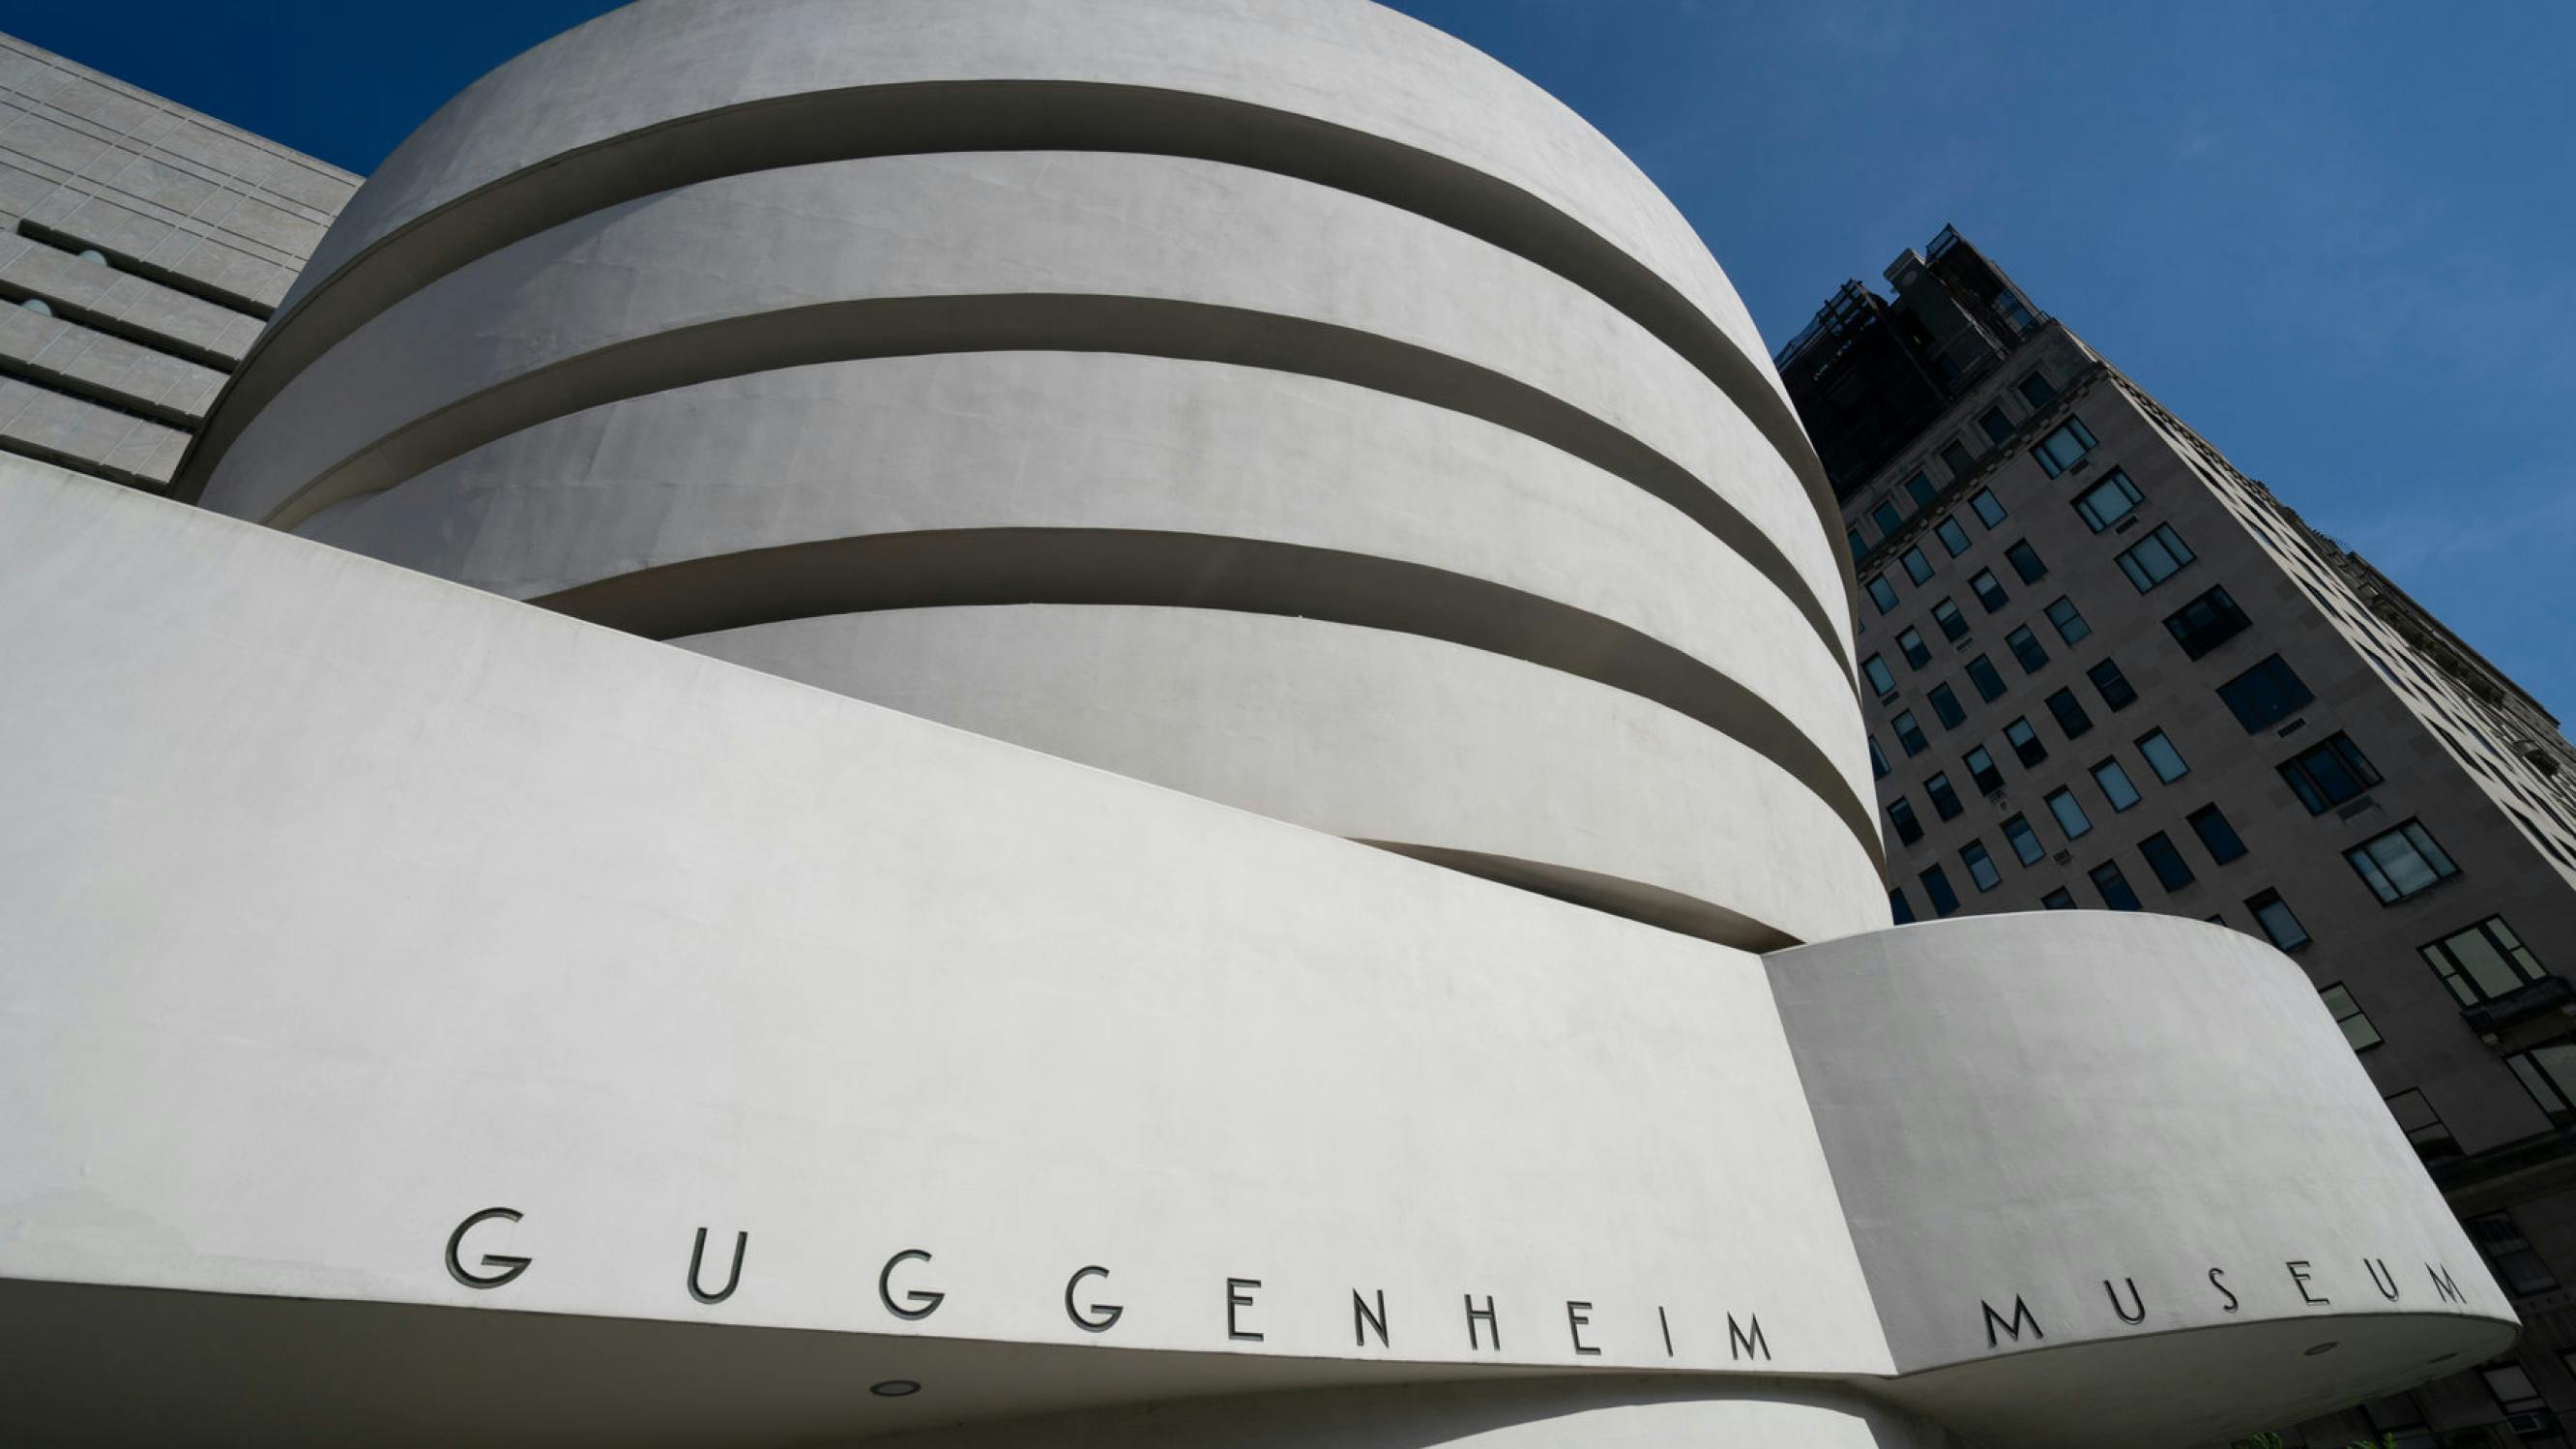 The exterior of the Guggenheim Museum